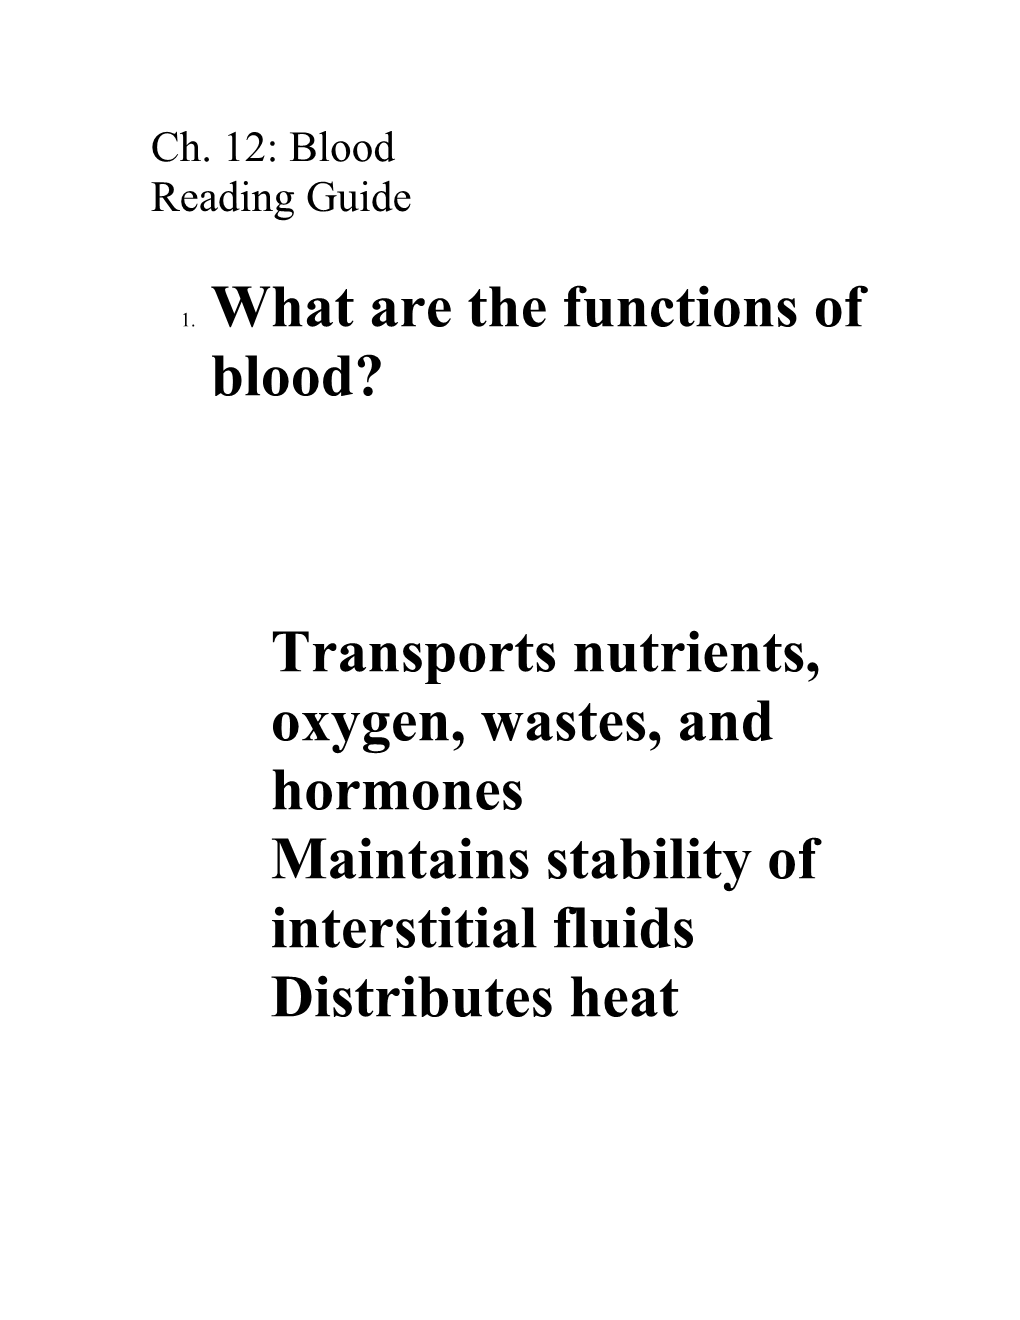 Transports Nutrients, Oxygen, Wastes, and Hormones